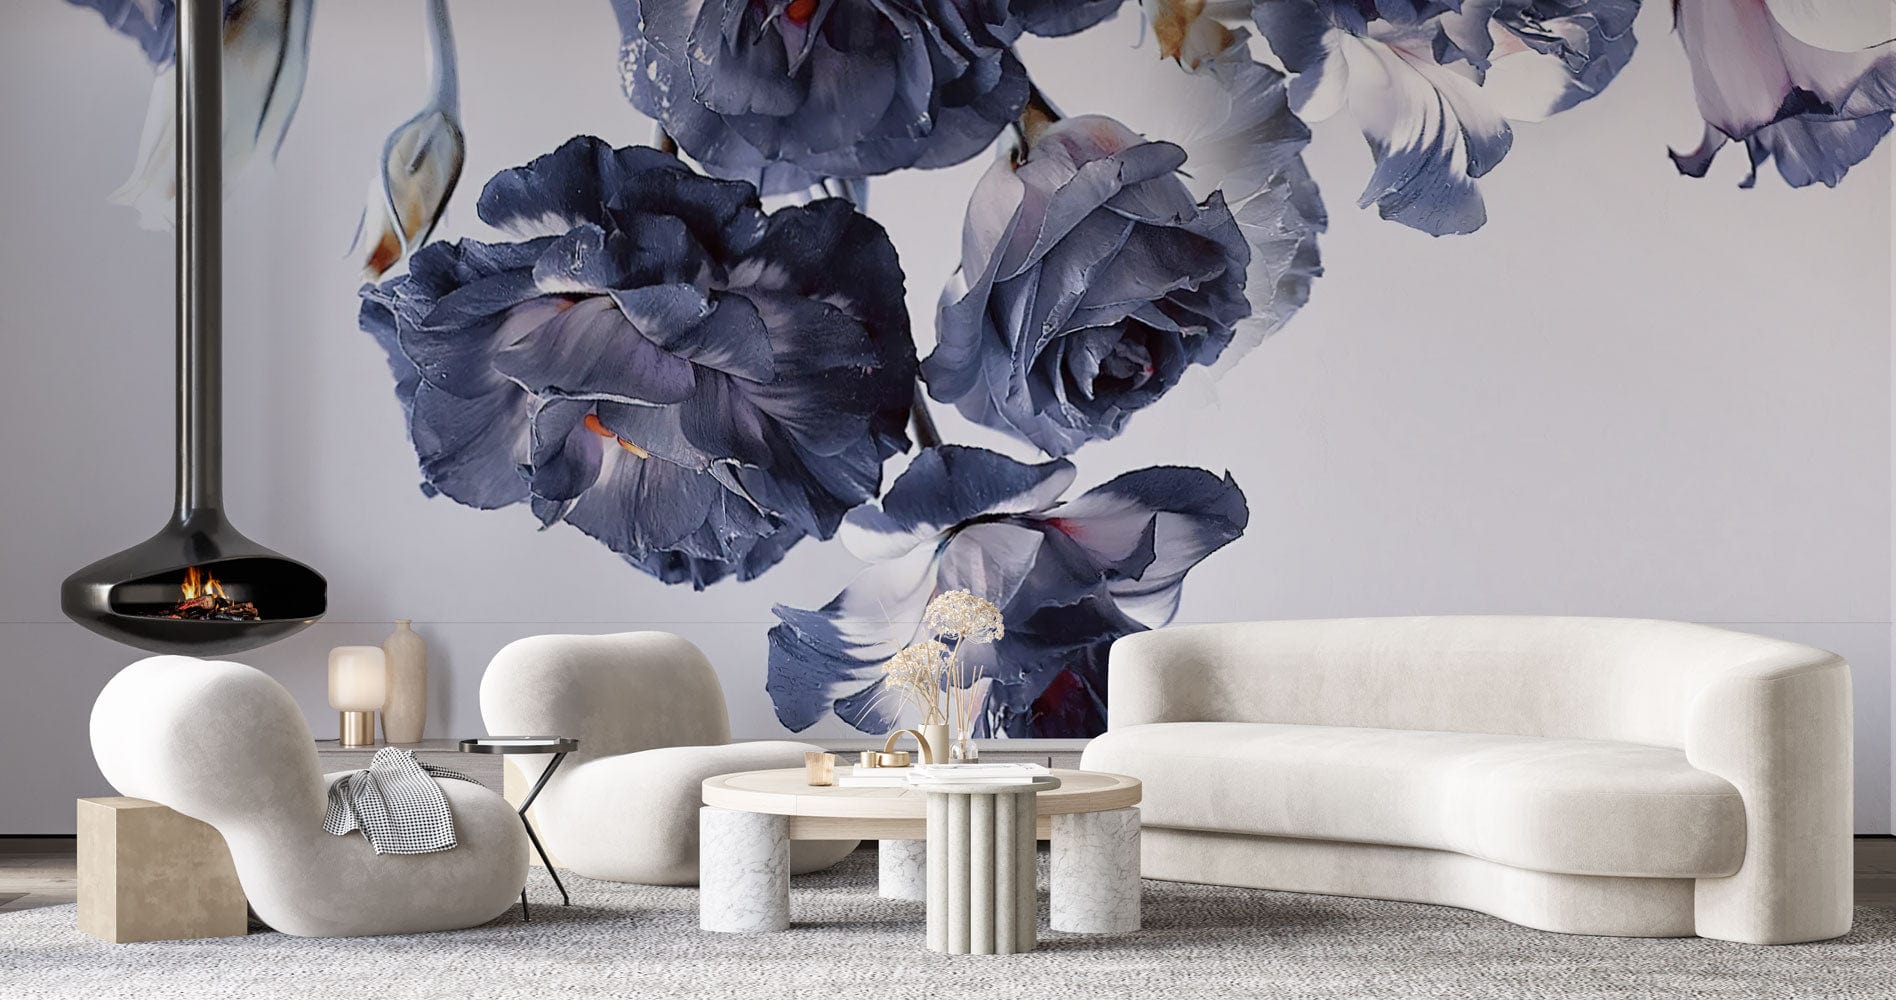 Inverted Purple Flowers Pattern Wallpaper Mural for Use in Decorating the Living Room